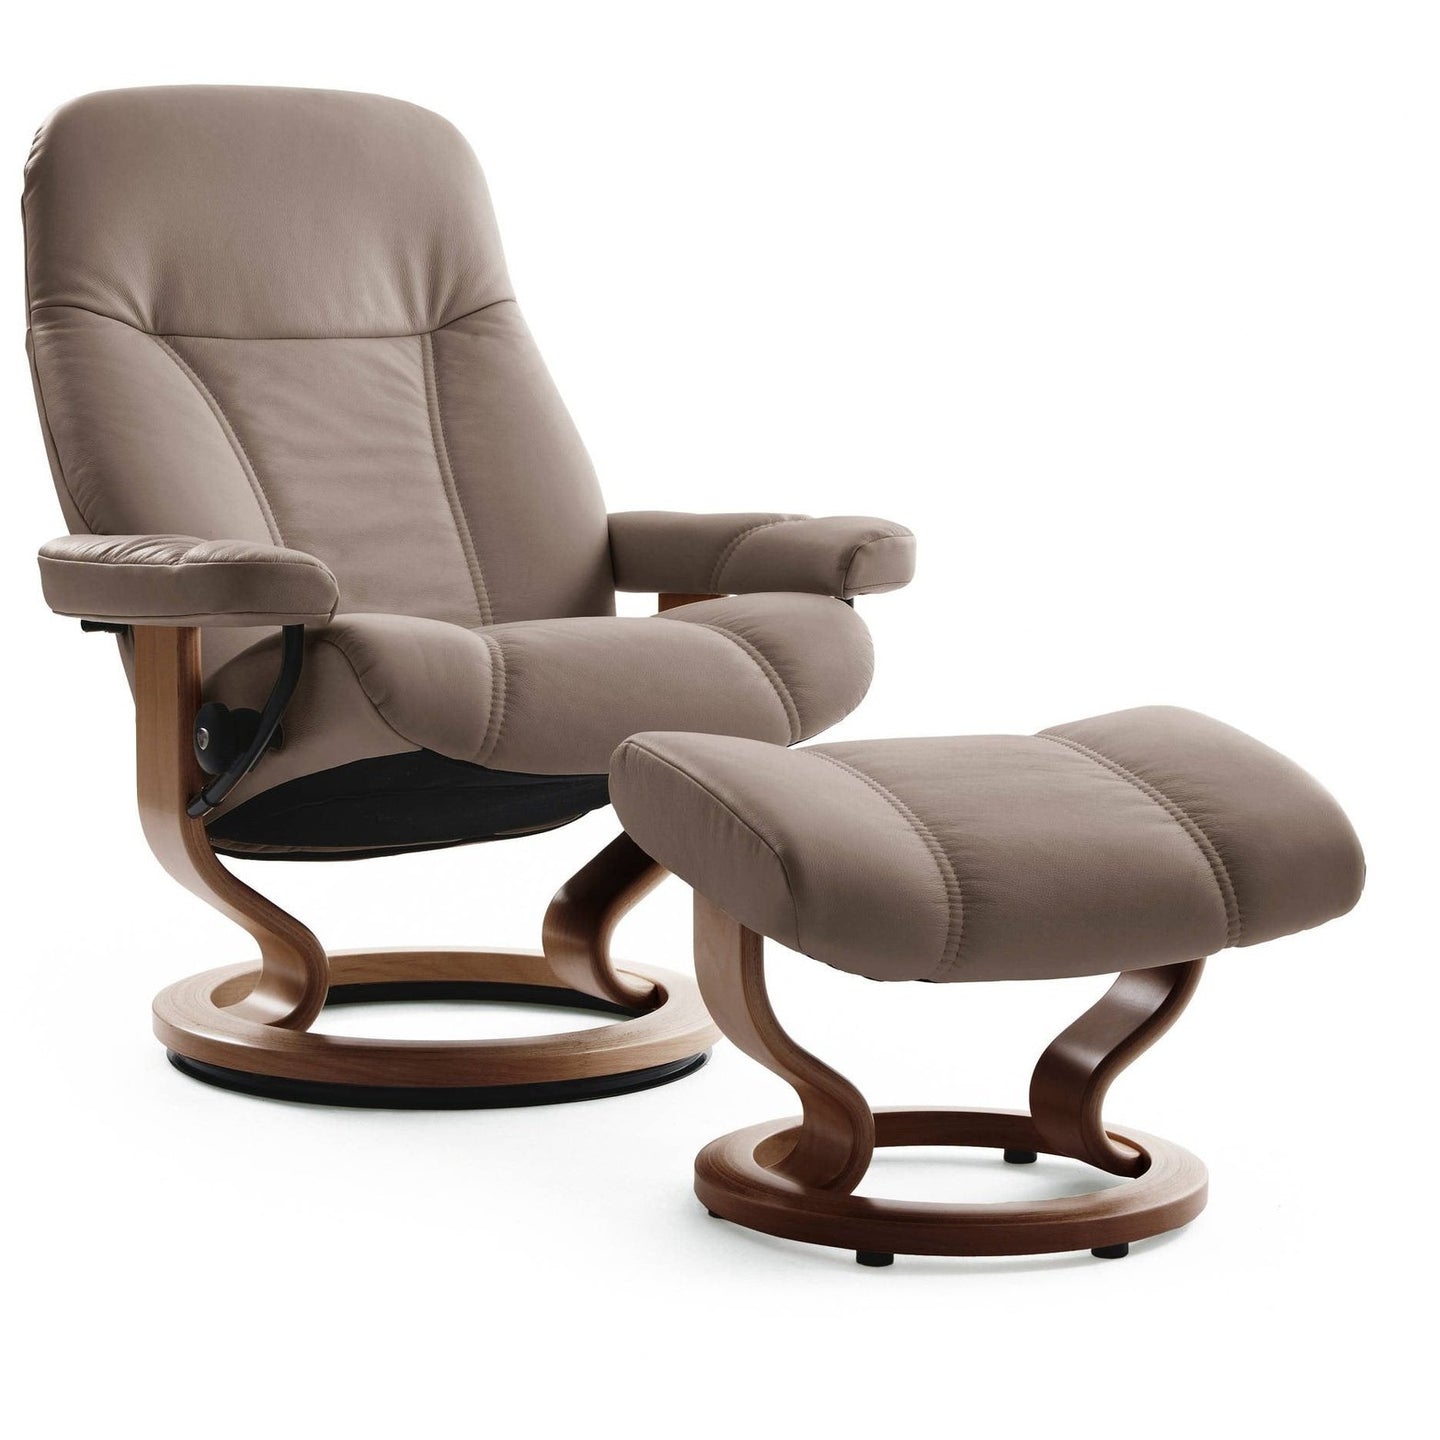 Stressless Consul Small Recliner with Stool